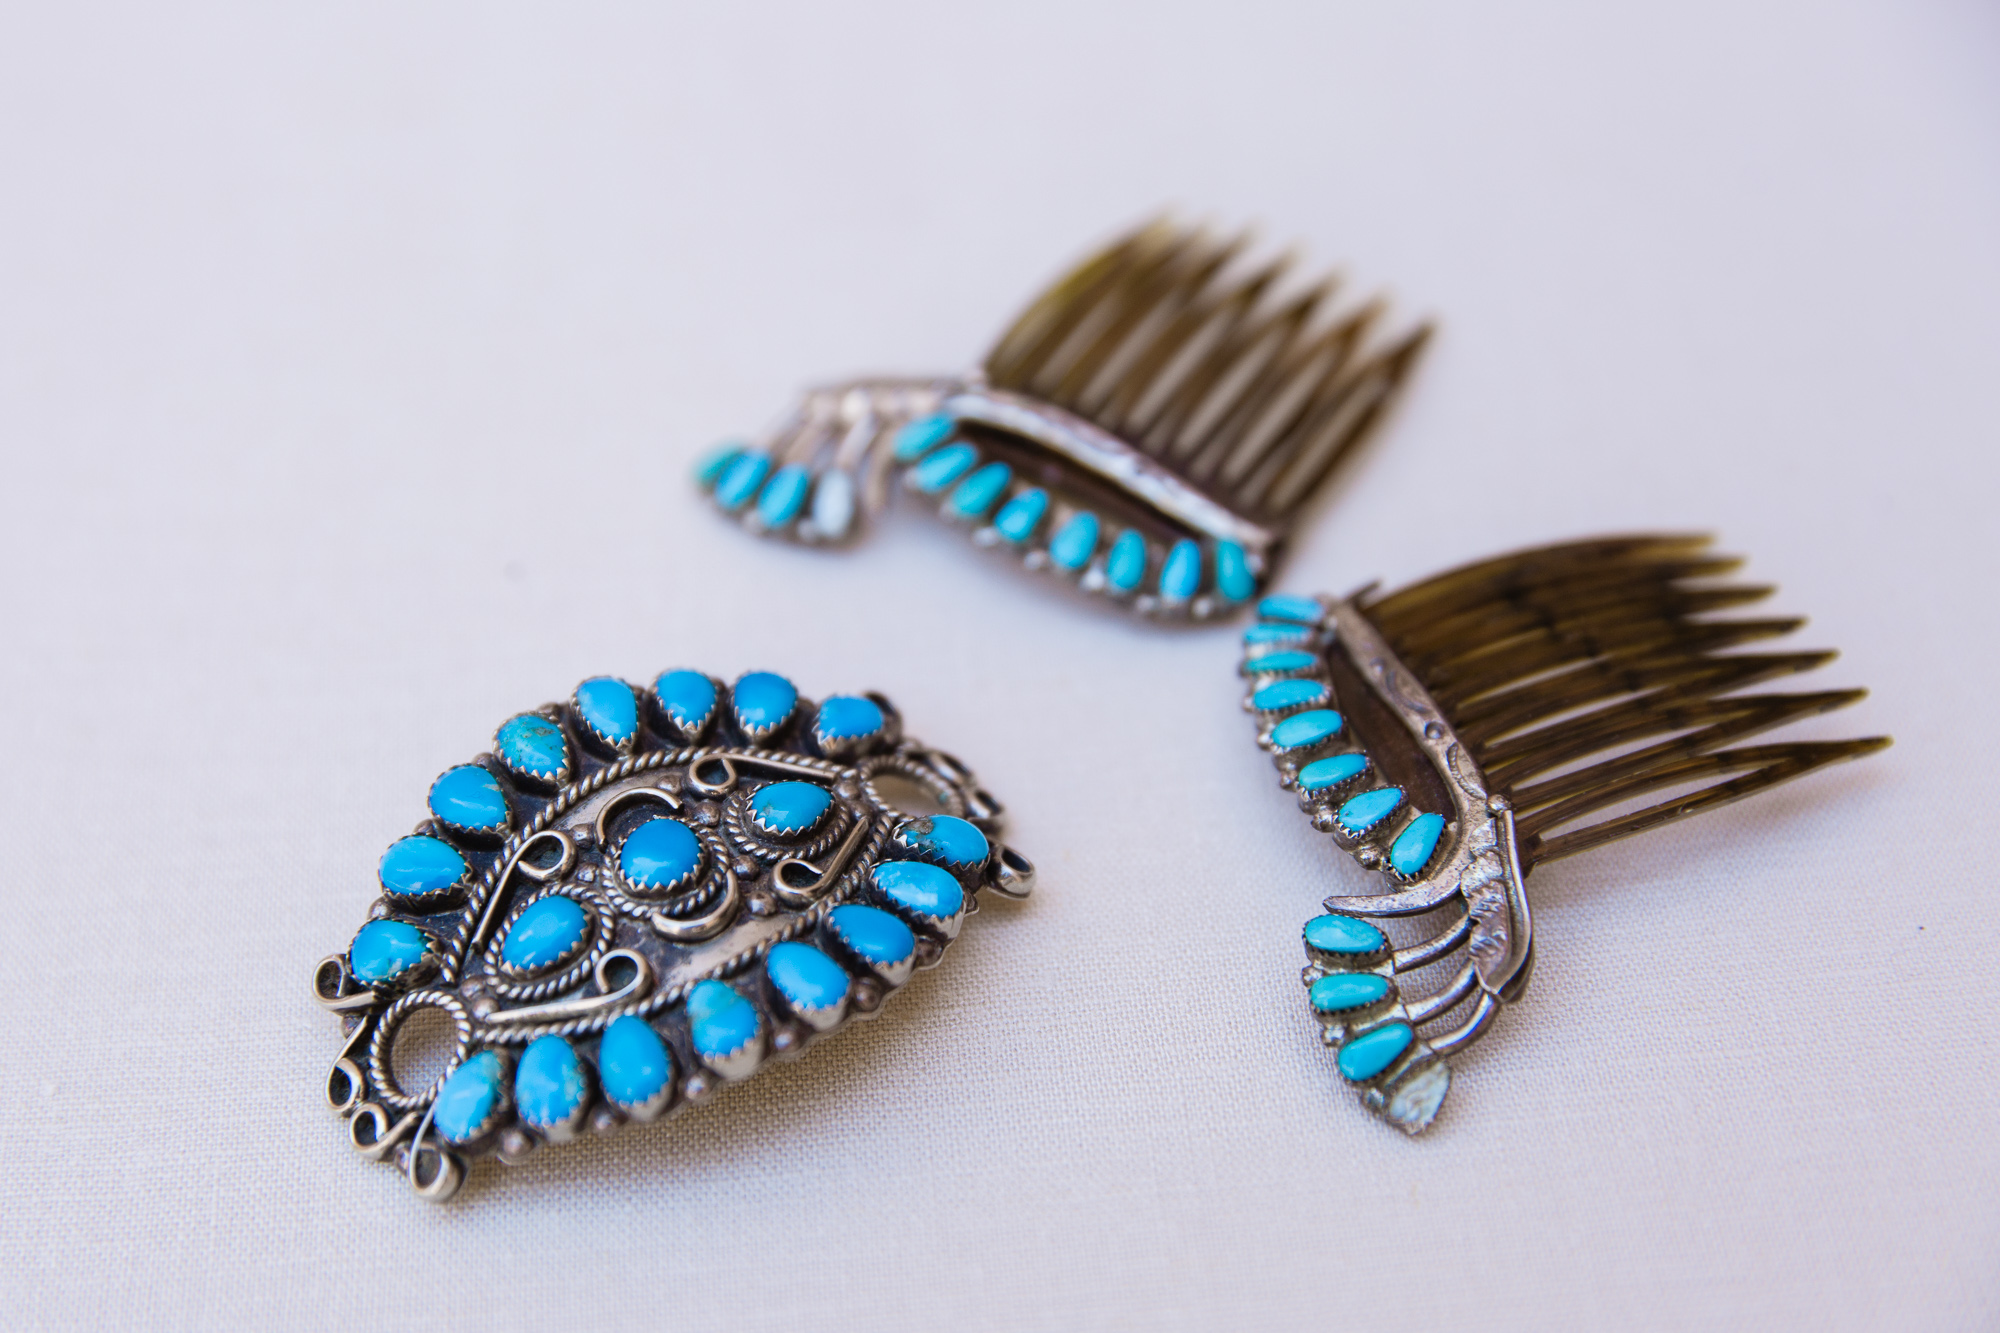 Turquoise hair pieces for the Navajo bride at her wedding by Arizona wedding photographer PMA Photography.